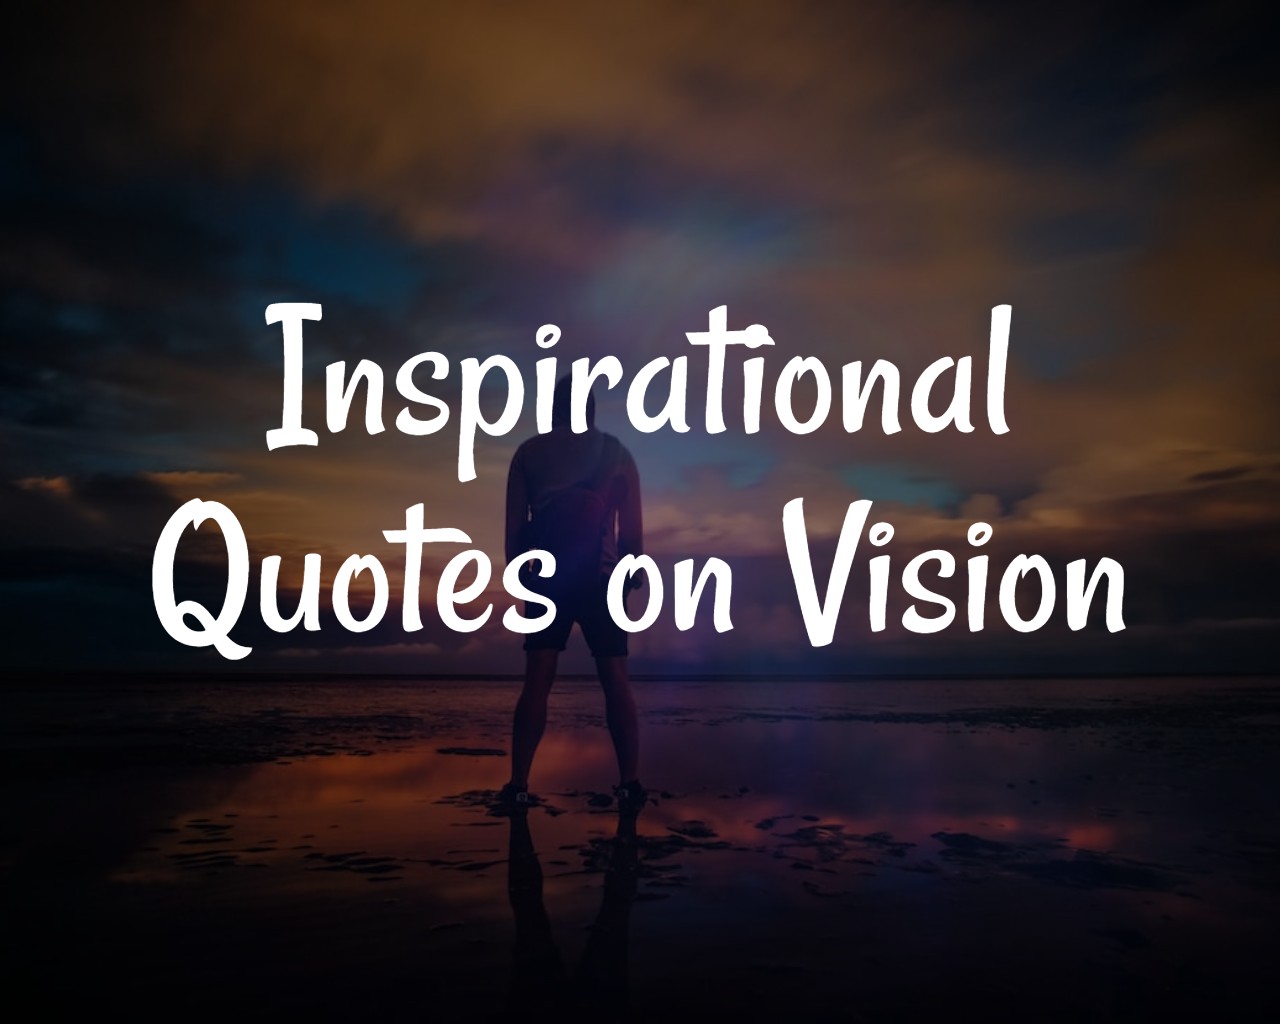 75 Inspirational Quotes on Vision | The Inspiring Journal